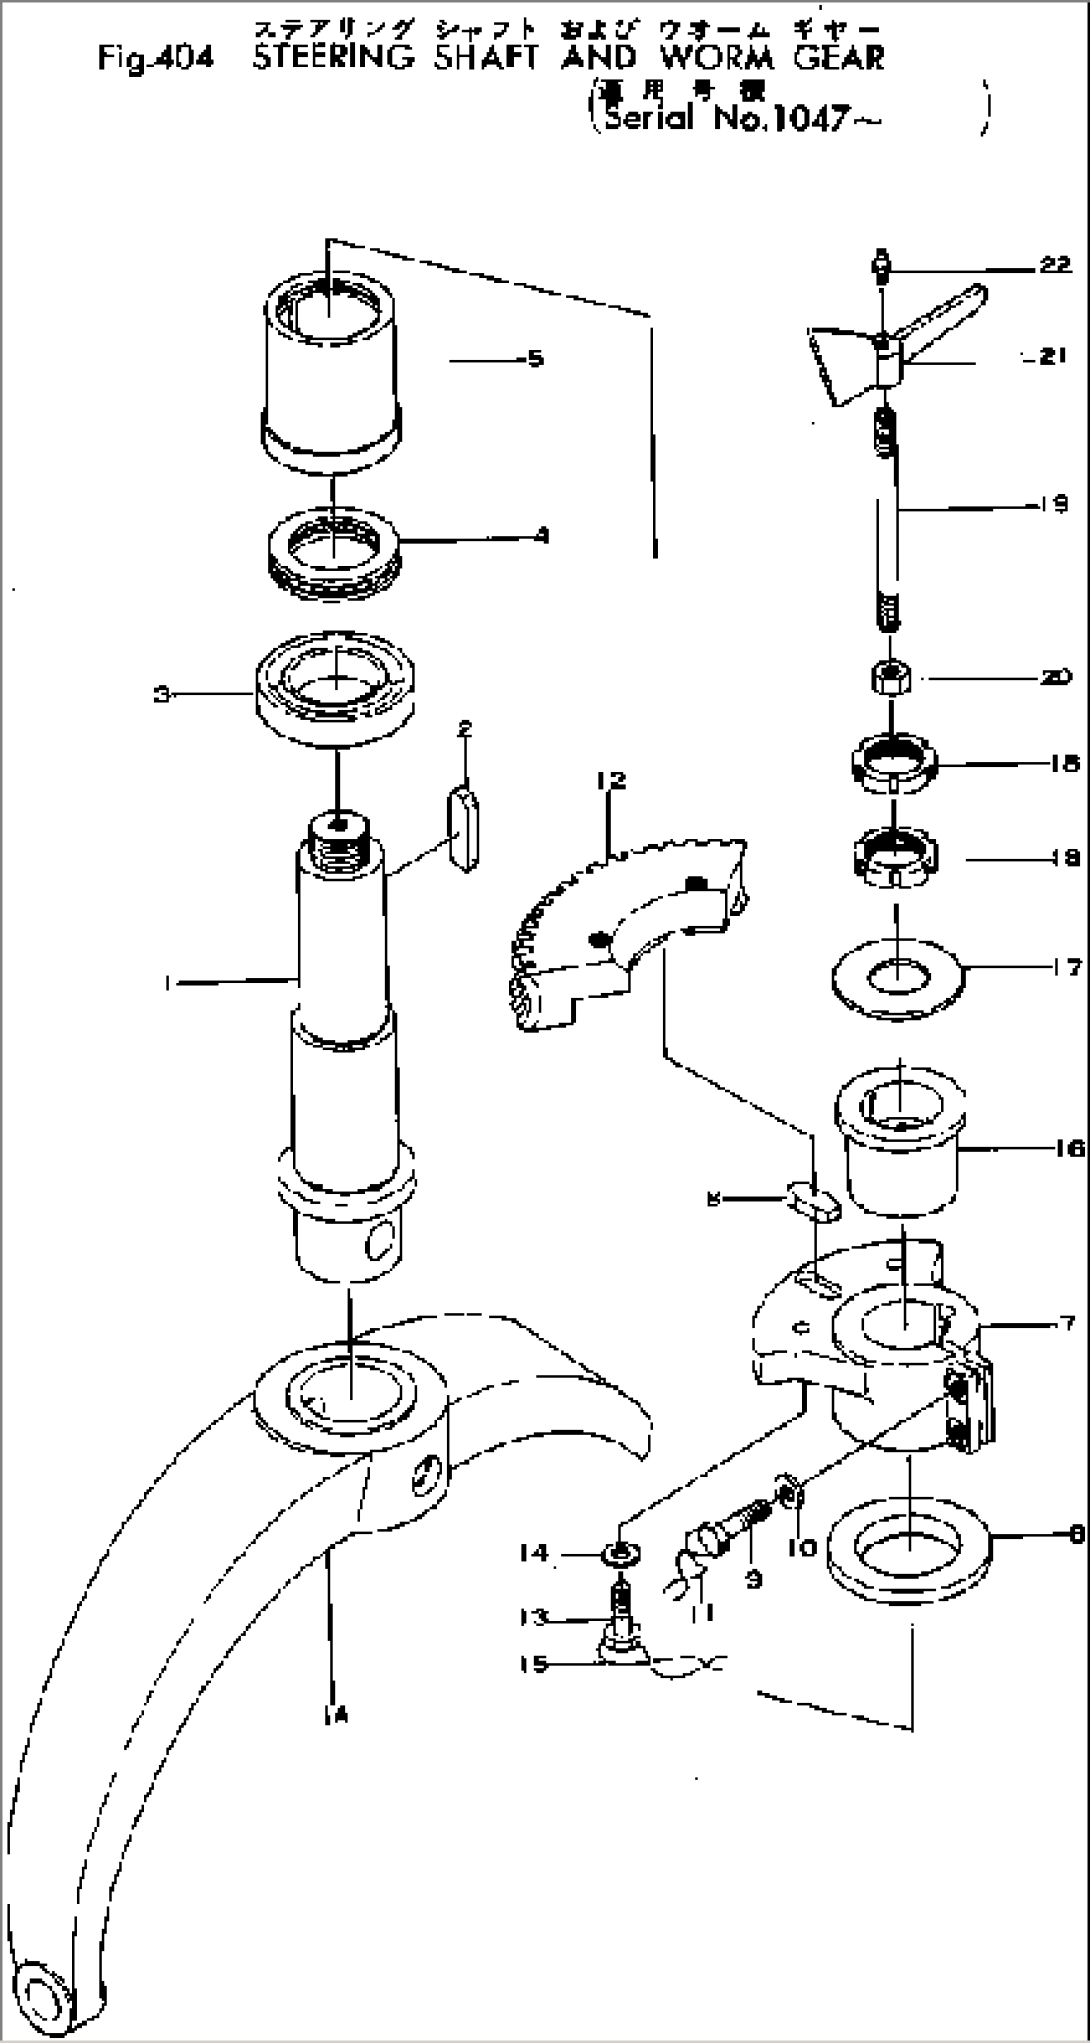 STEERING SHAFT AND WORM GEAR